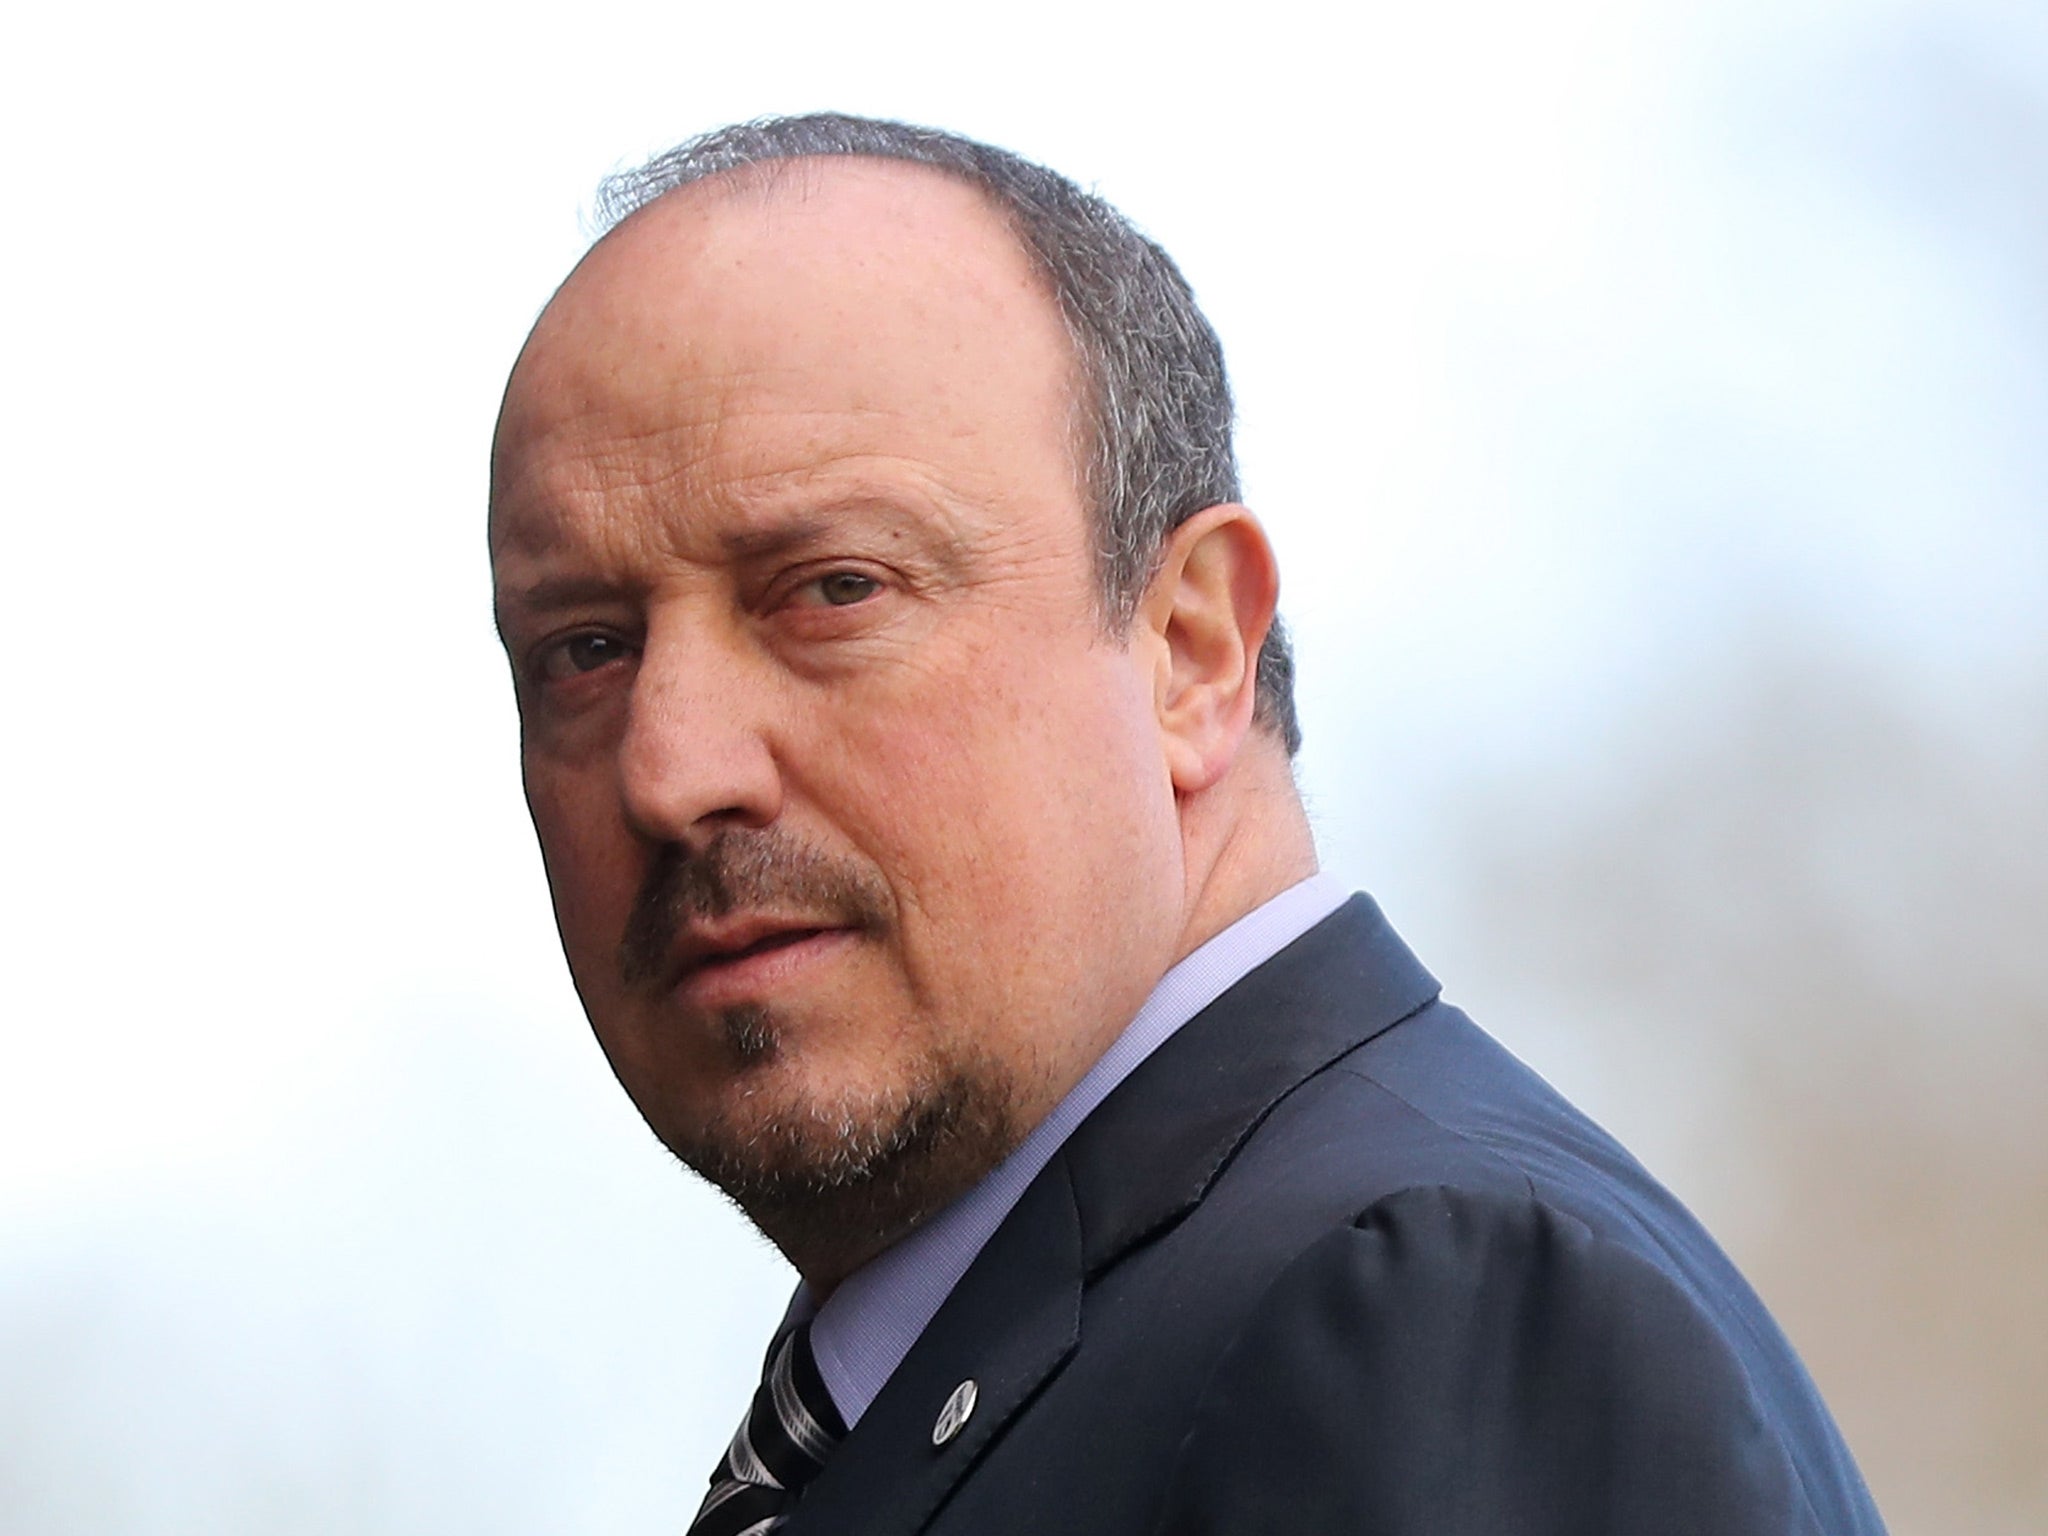 The league remains Rafa Benitez's priority, but this heavy Cup defeat will have hurt